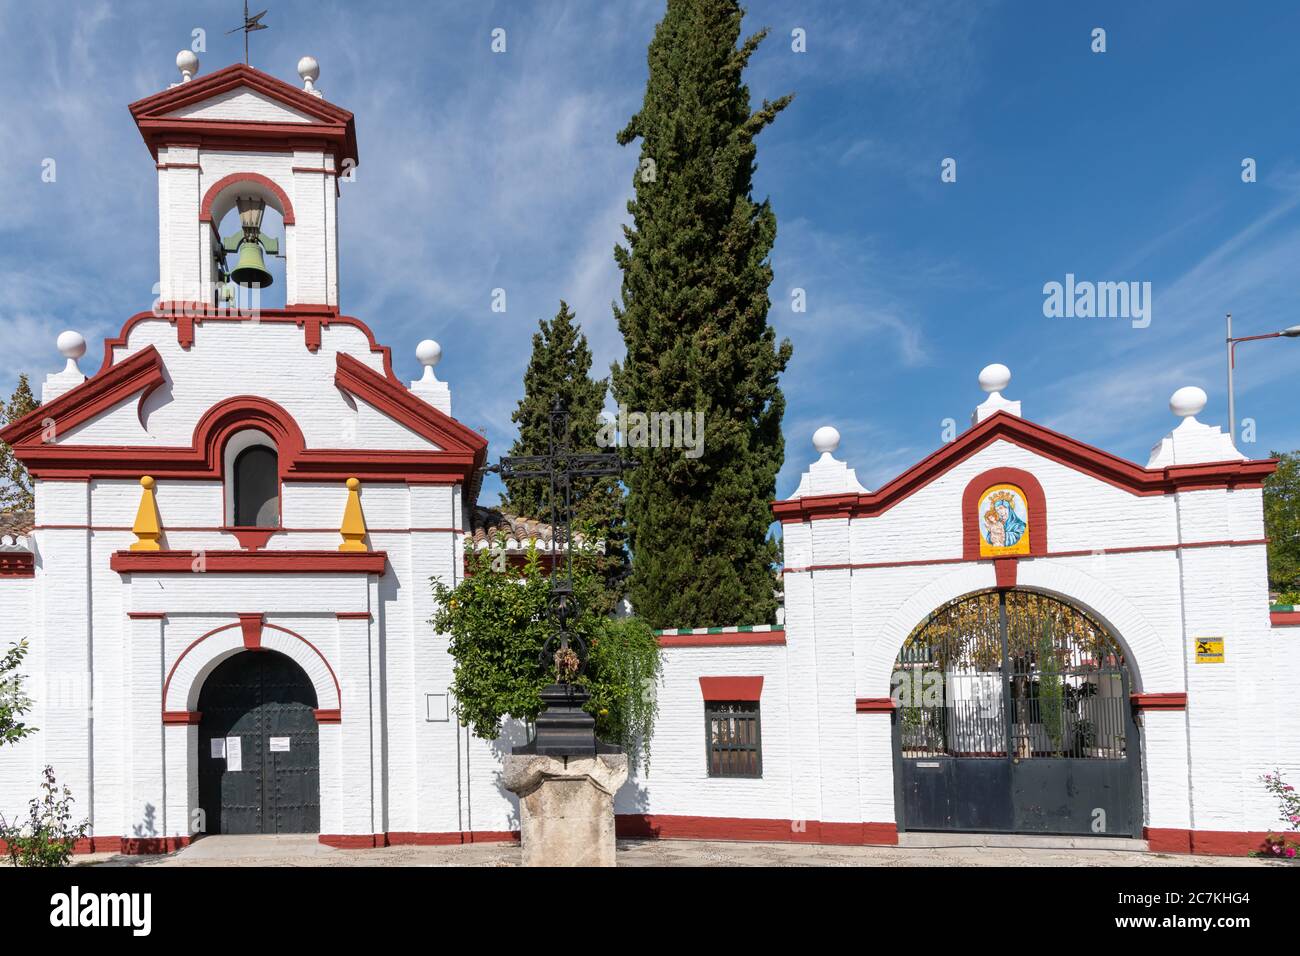 The facade of the Parroquia de San Isidro in Granada with its simple arched entrance, colourful orange obelisks & red framed pediment of its belfry. Stock Photo